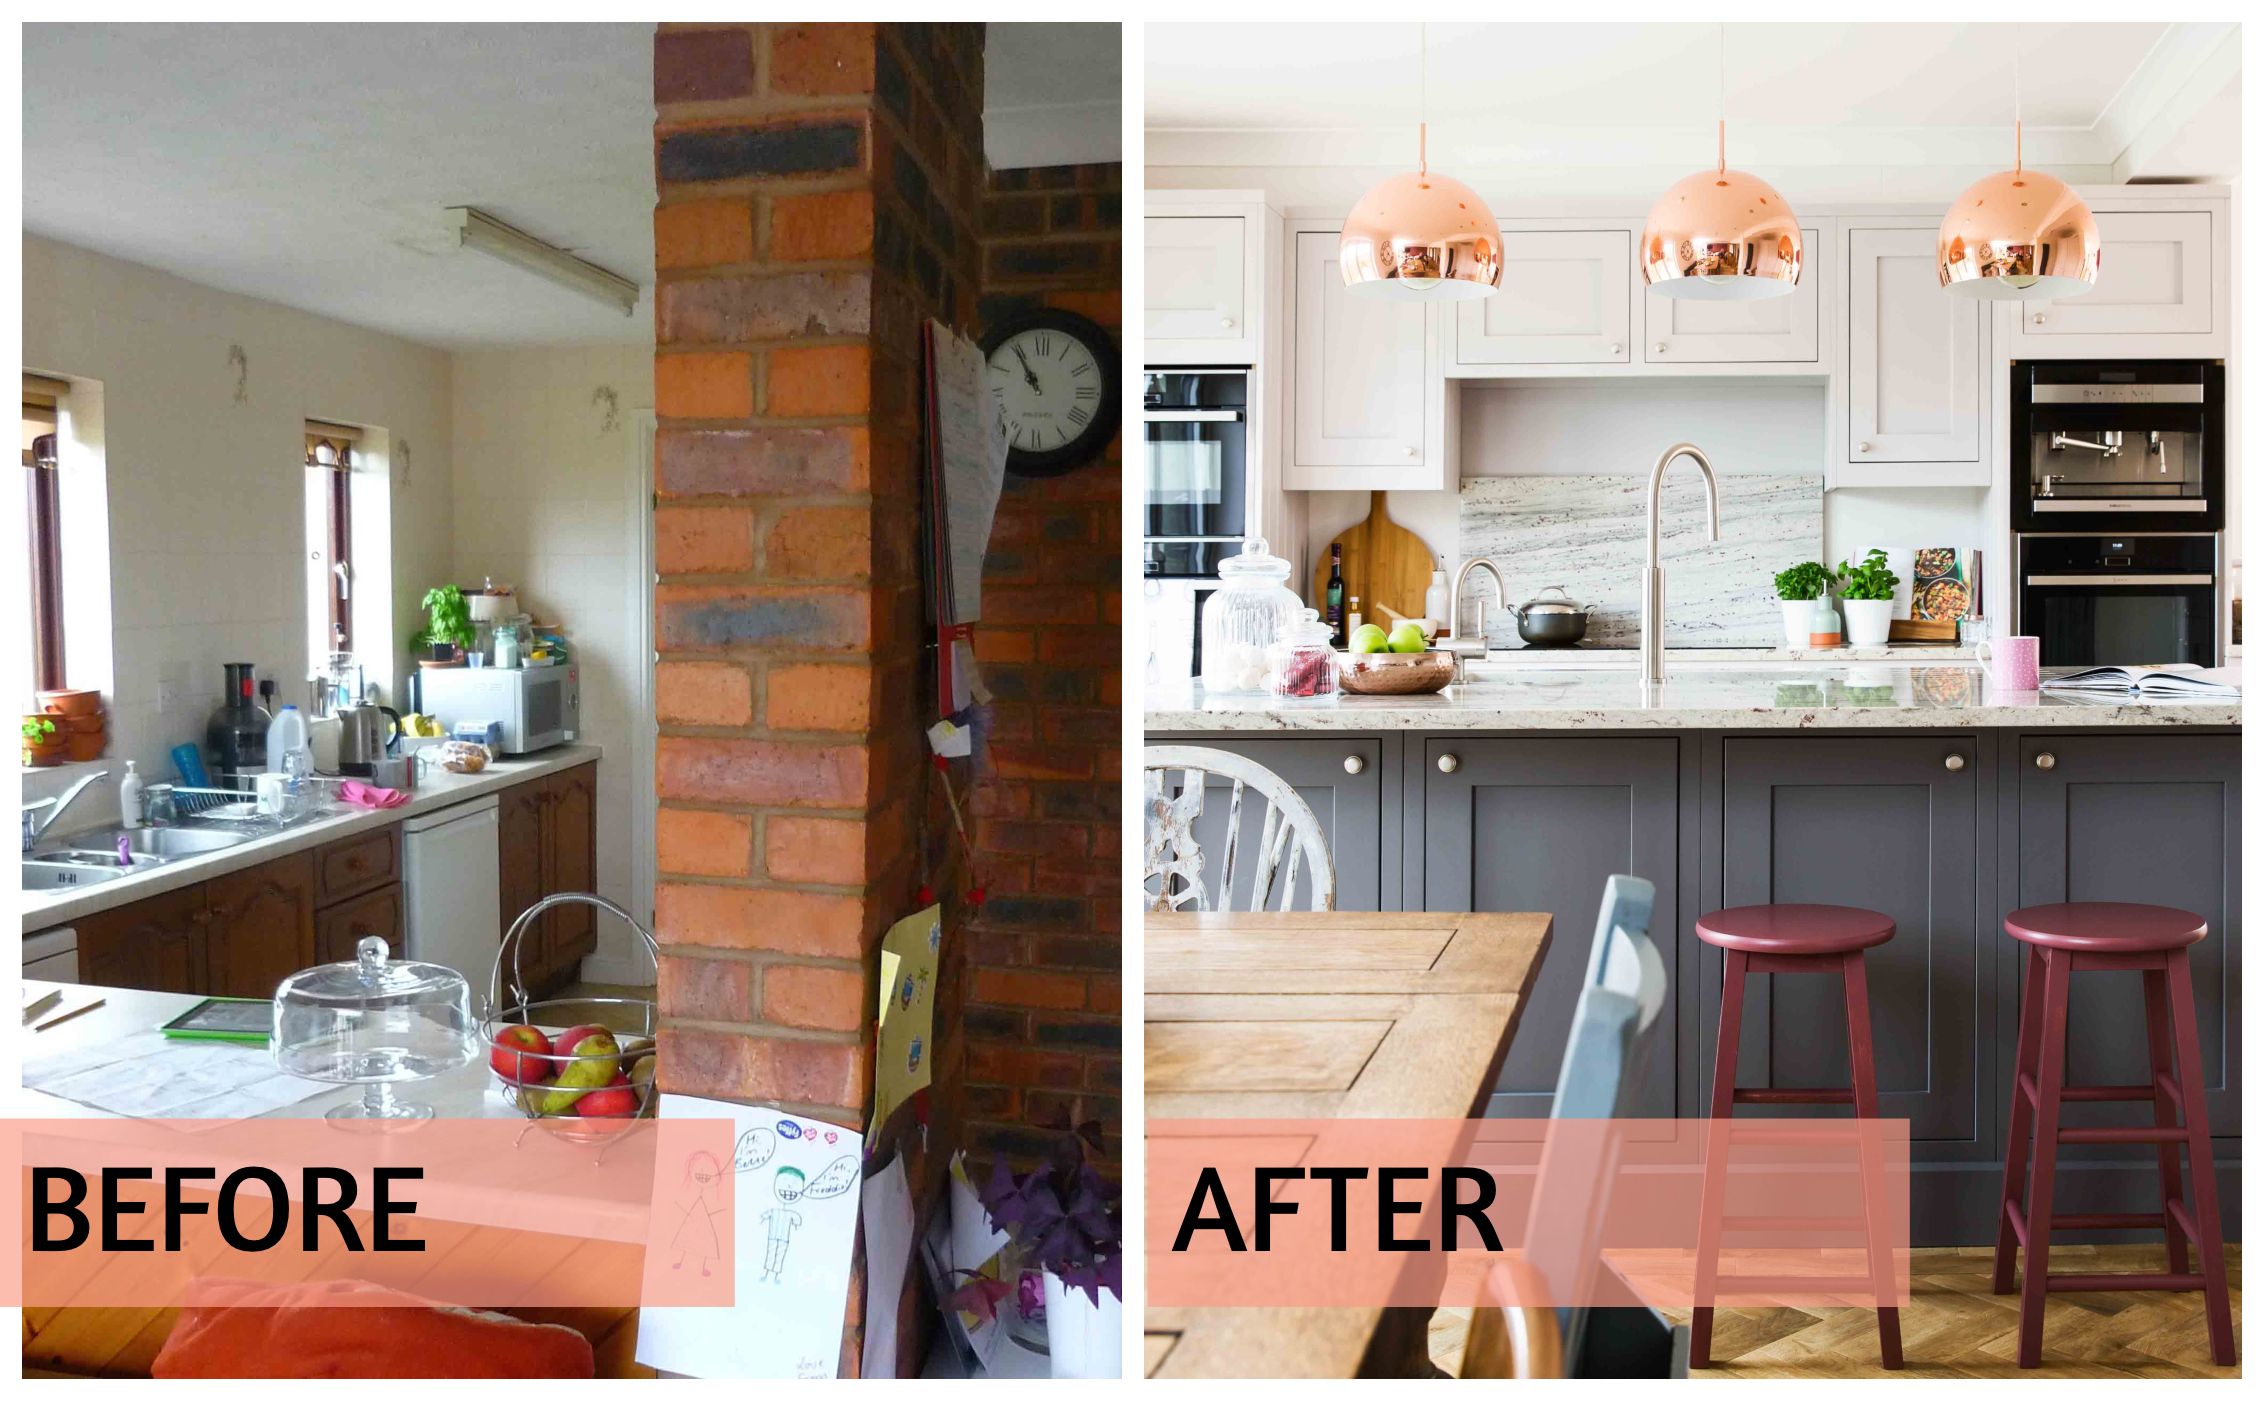 Kitchen Makeovers Before And After Removal Of Pillar And Wall Transforms Space